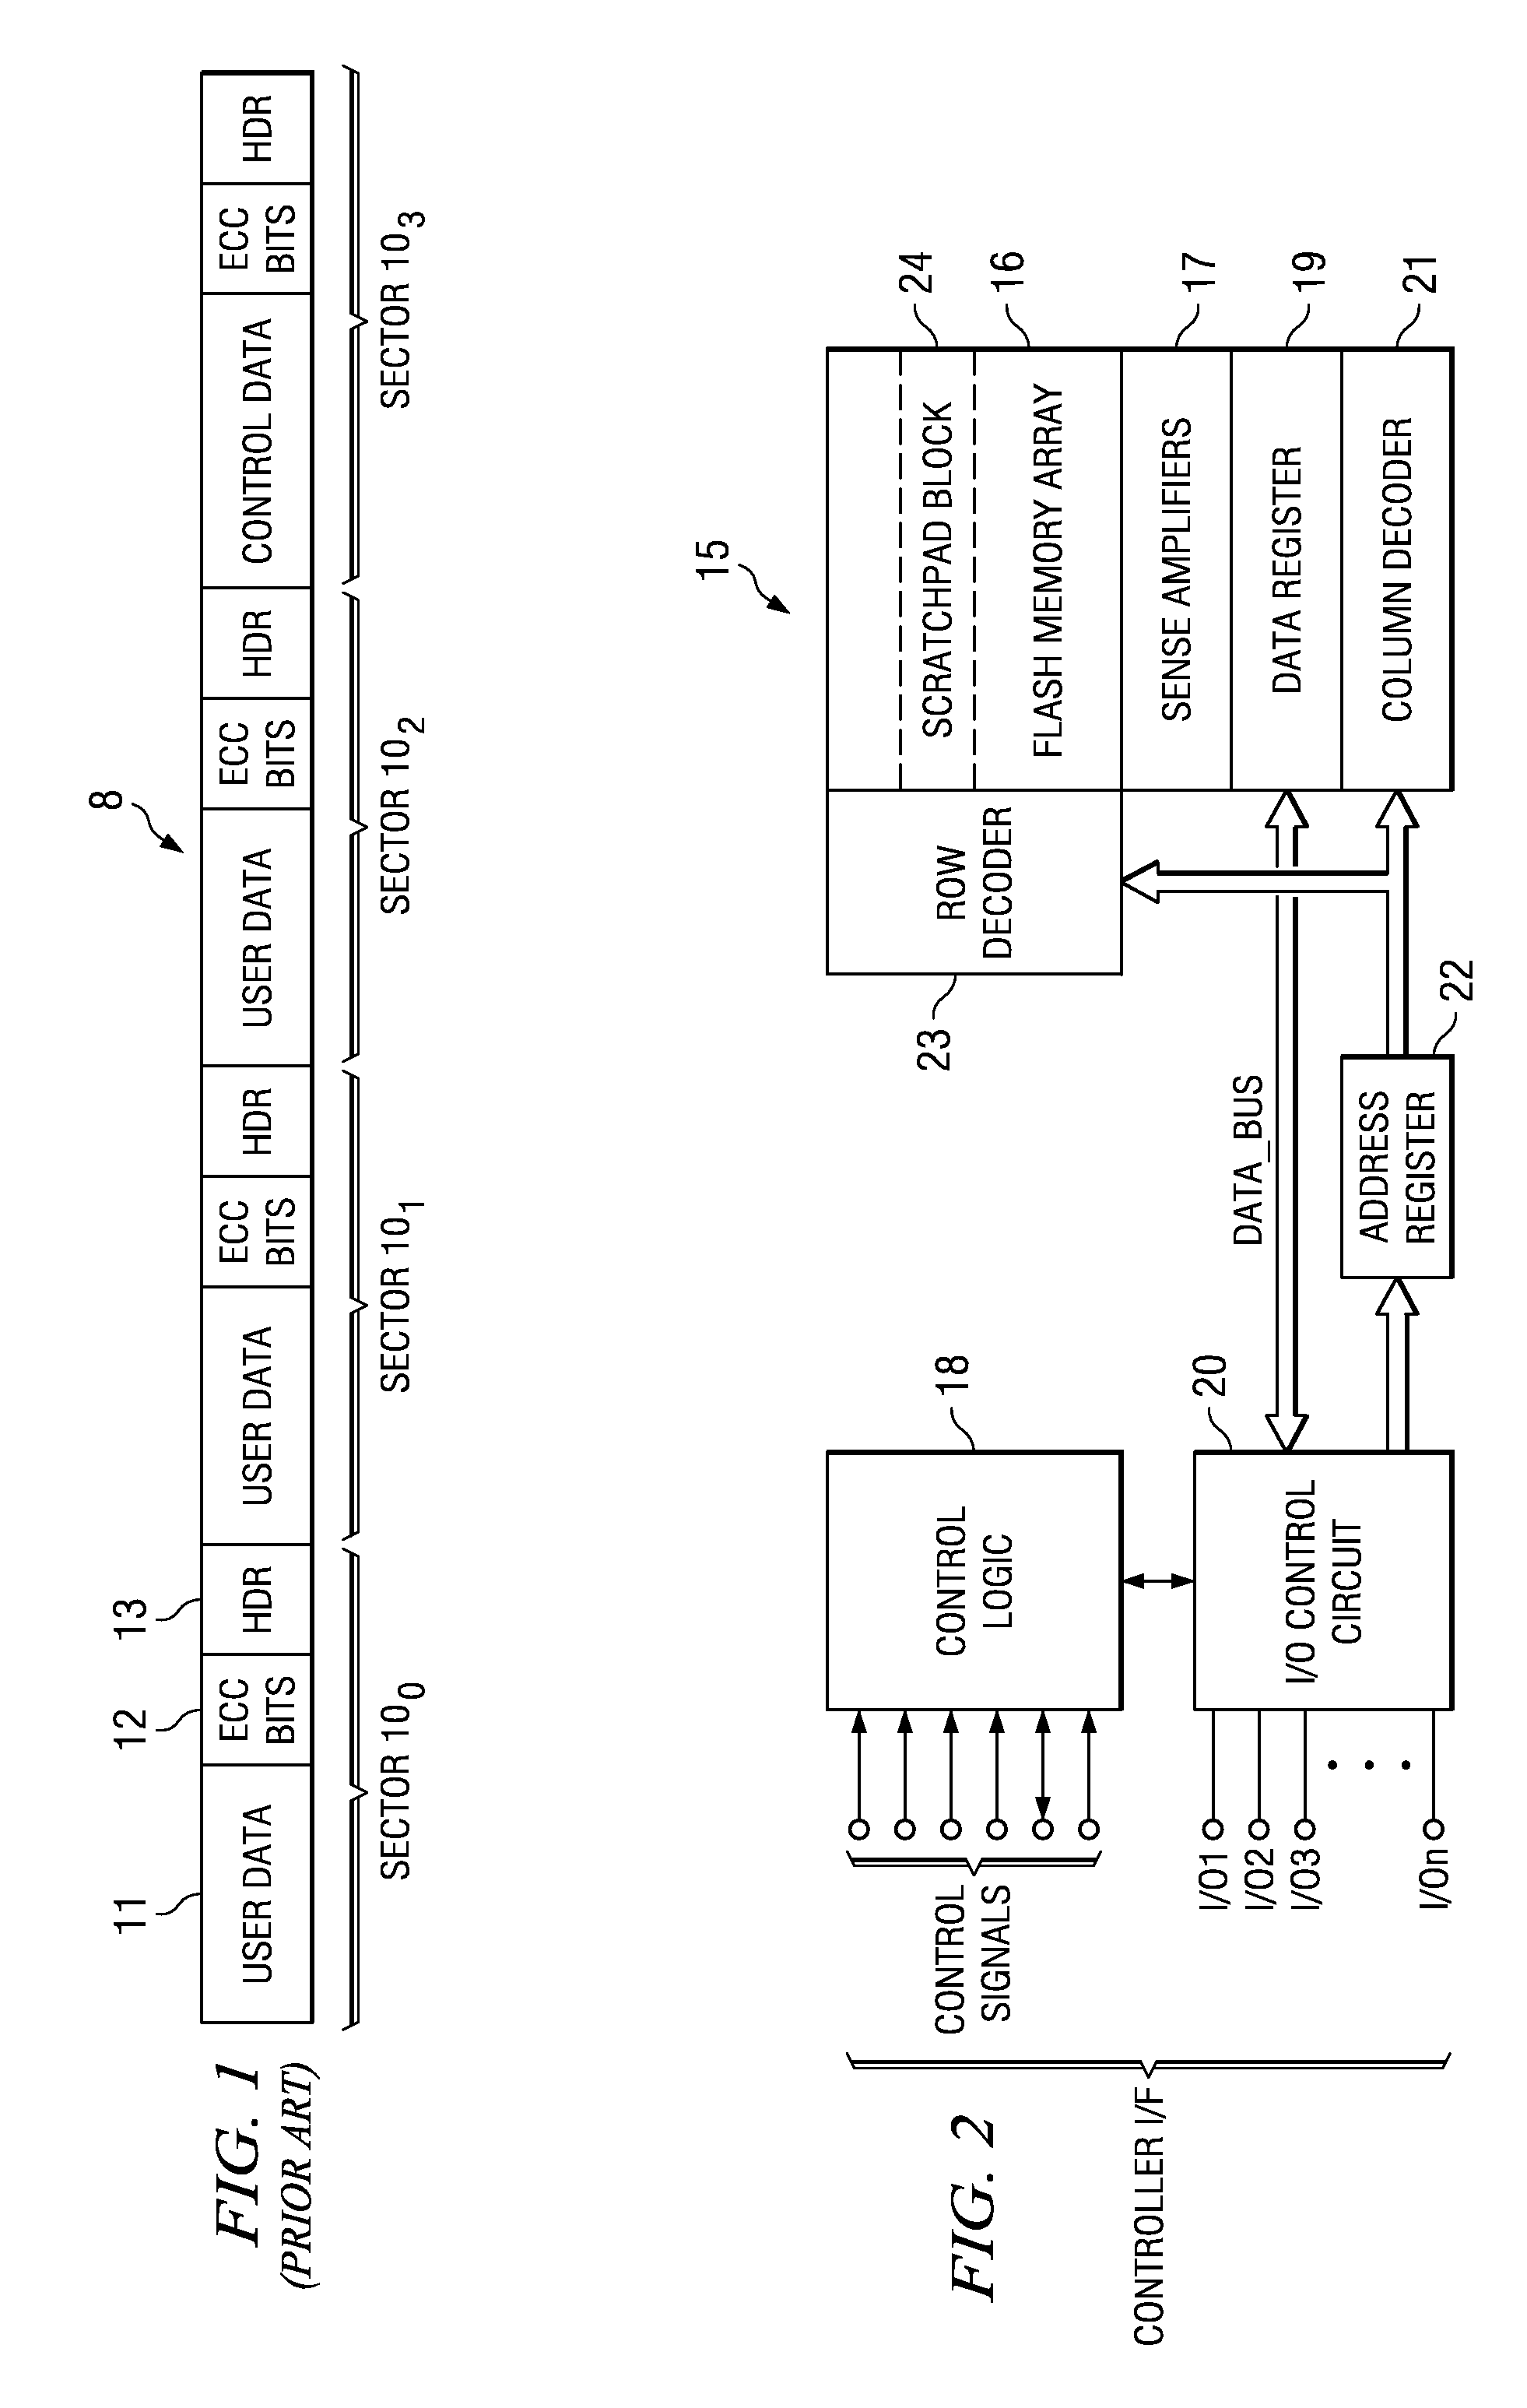 Error Correction Coding for Multiple-Sector Pages in Flash Memory Devices